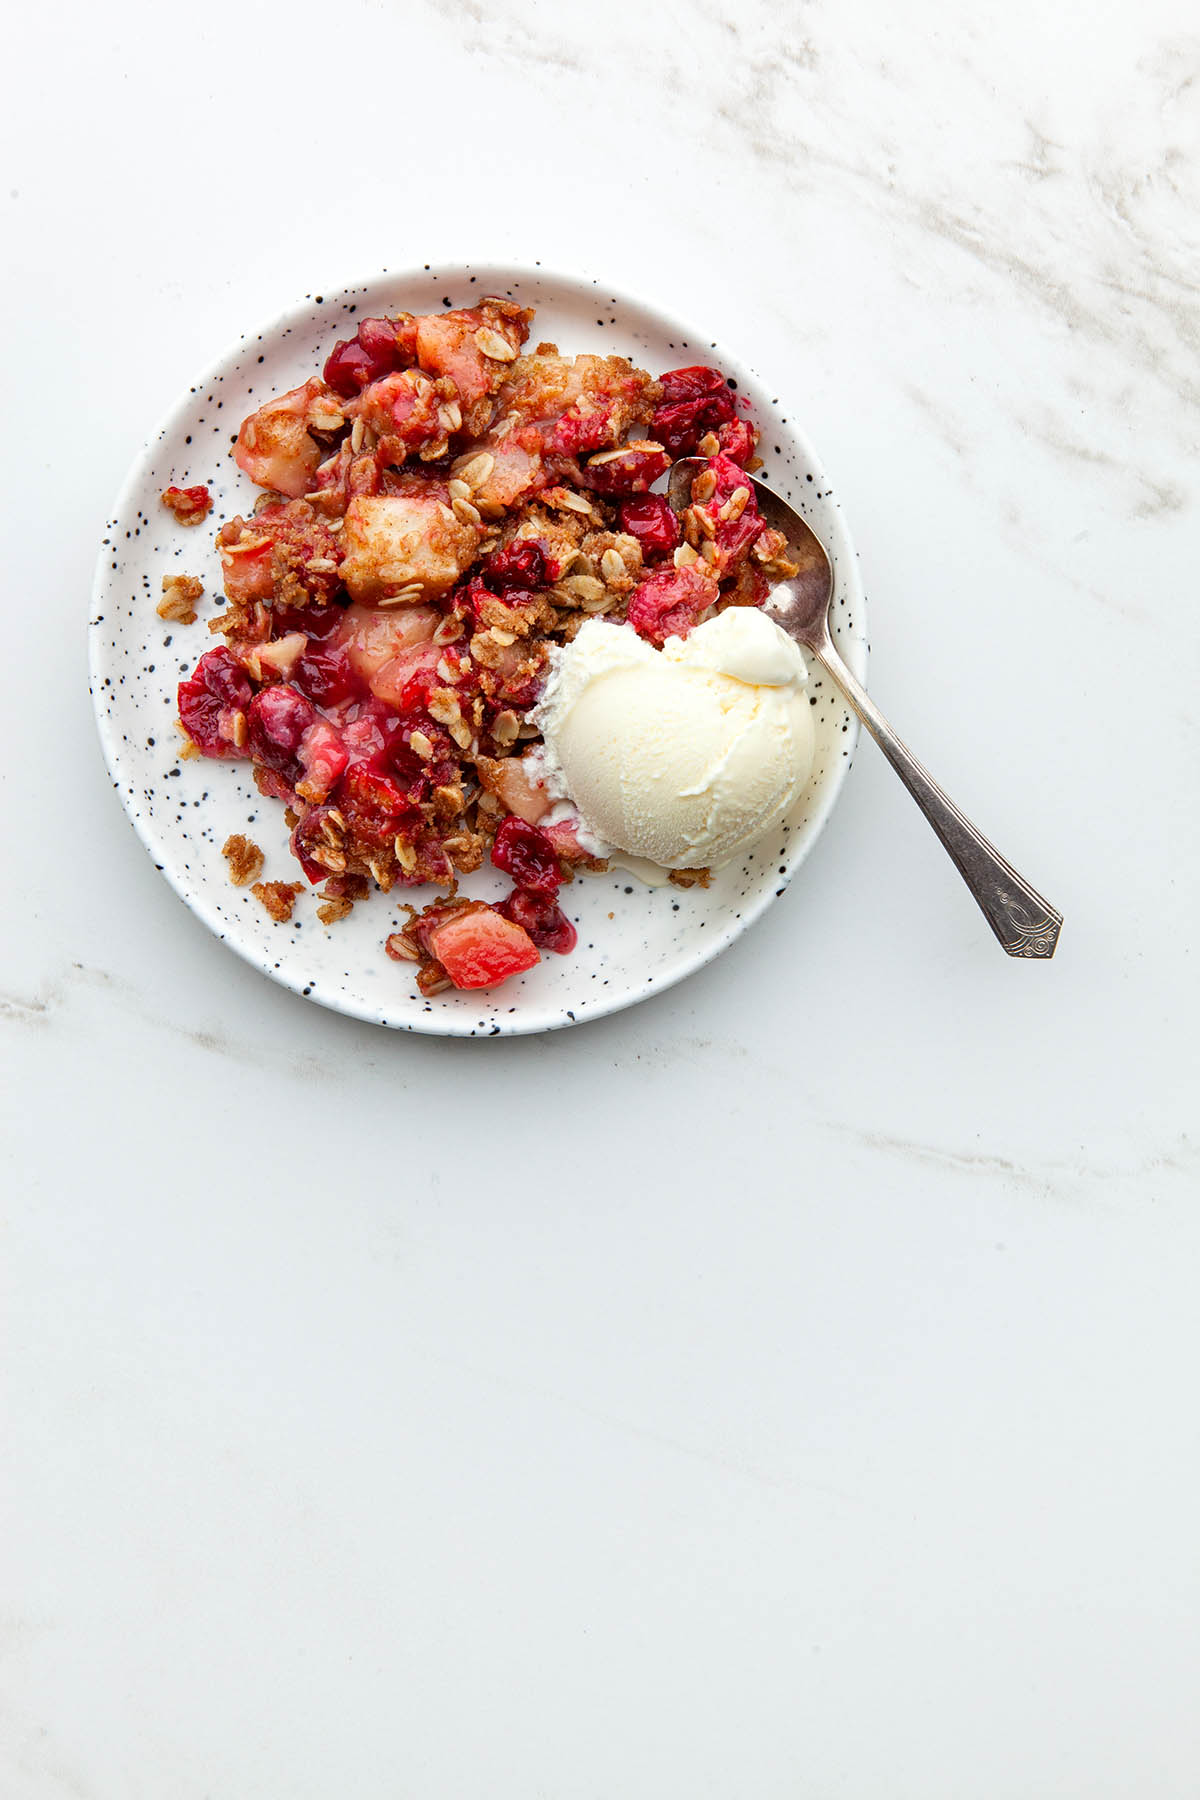 A plate of cranberry apple crisp topped with ice cream.